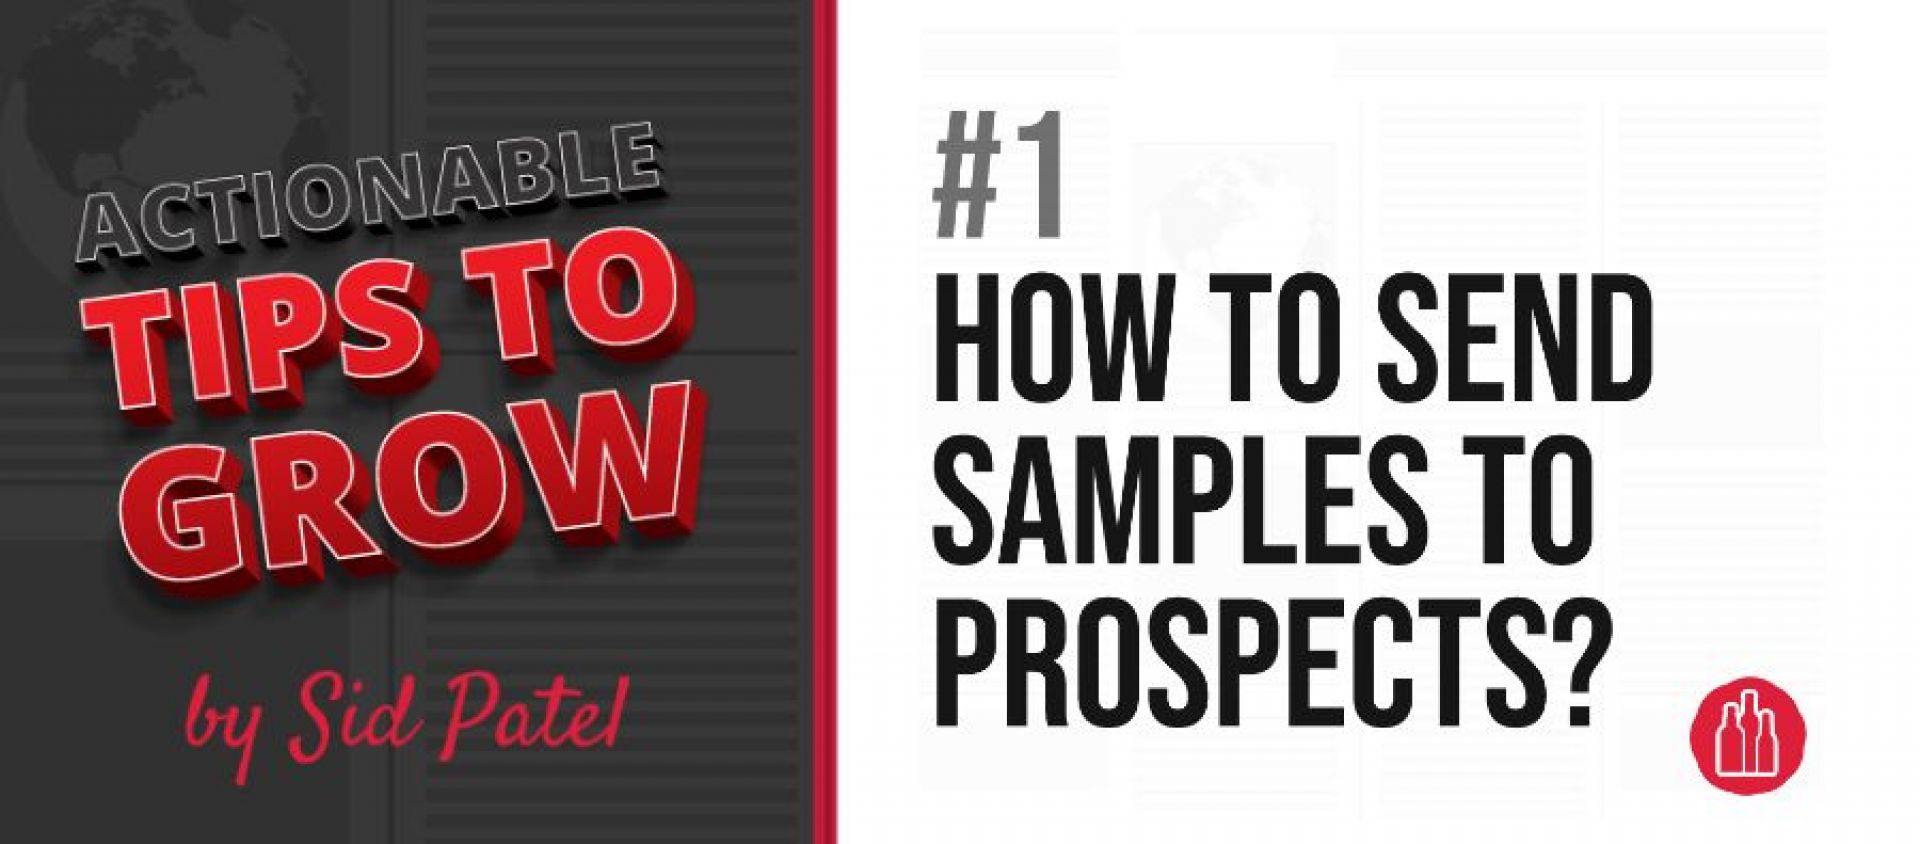 Photo for: How To Send Samples To Prospects